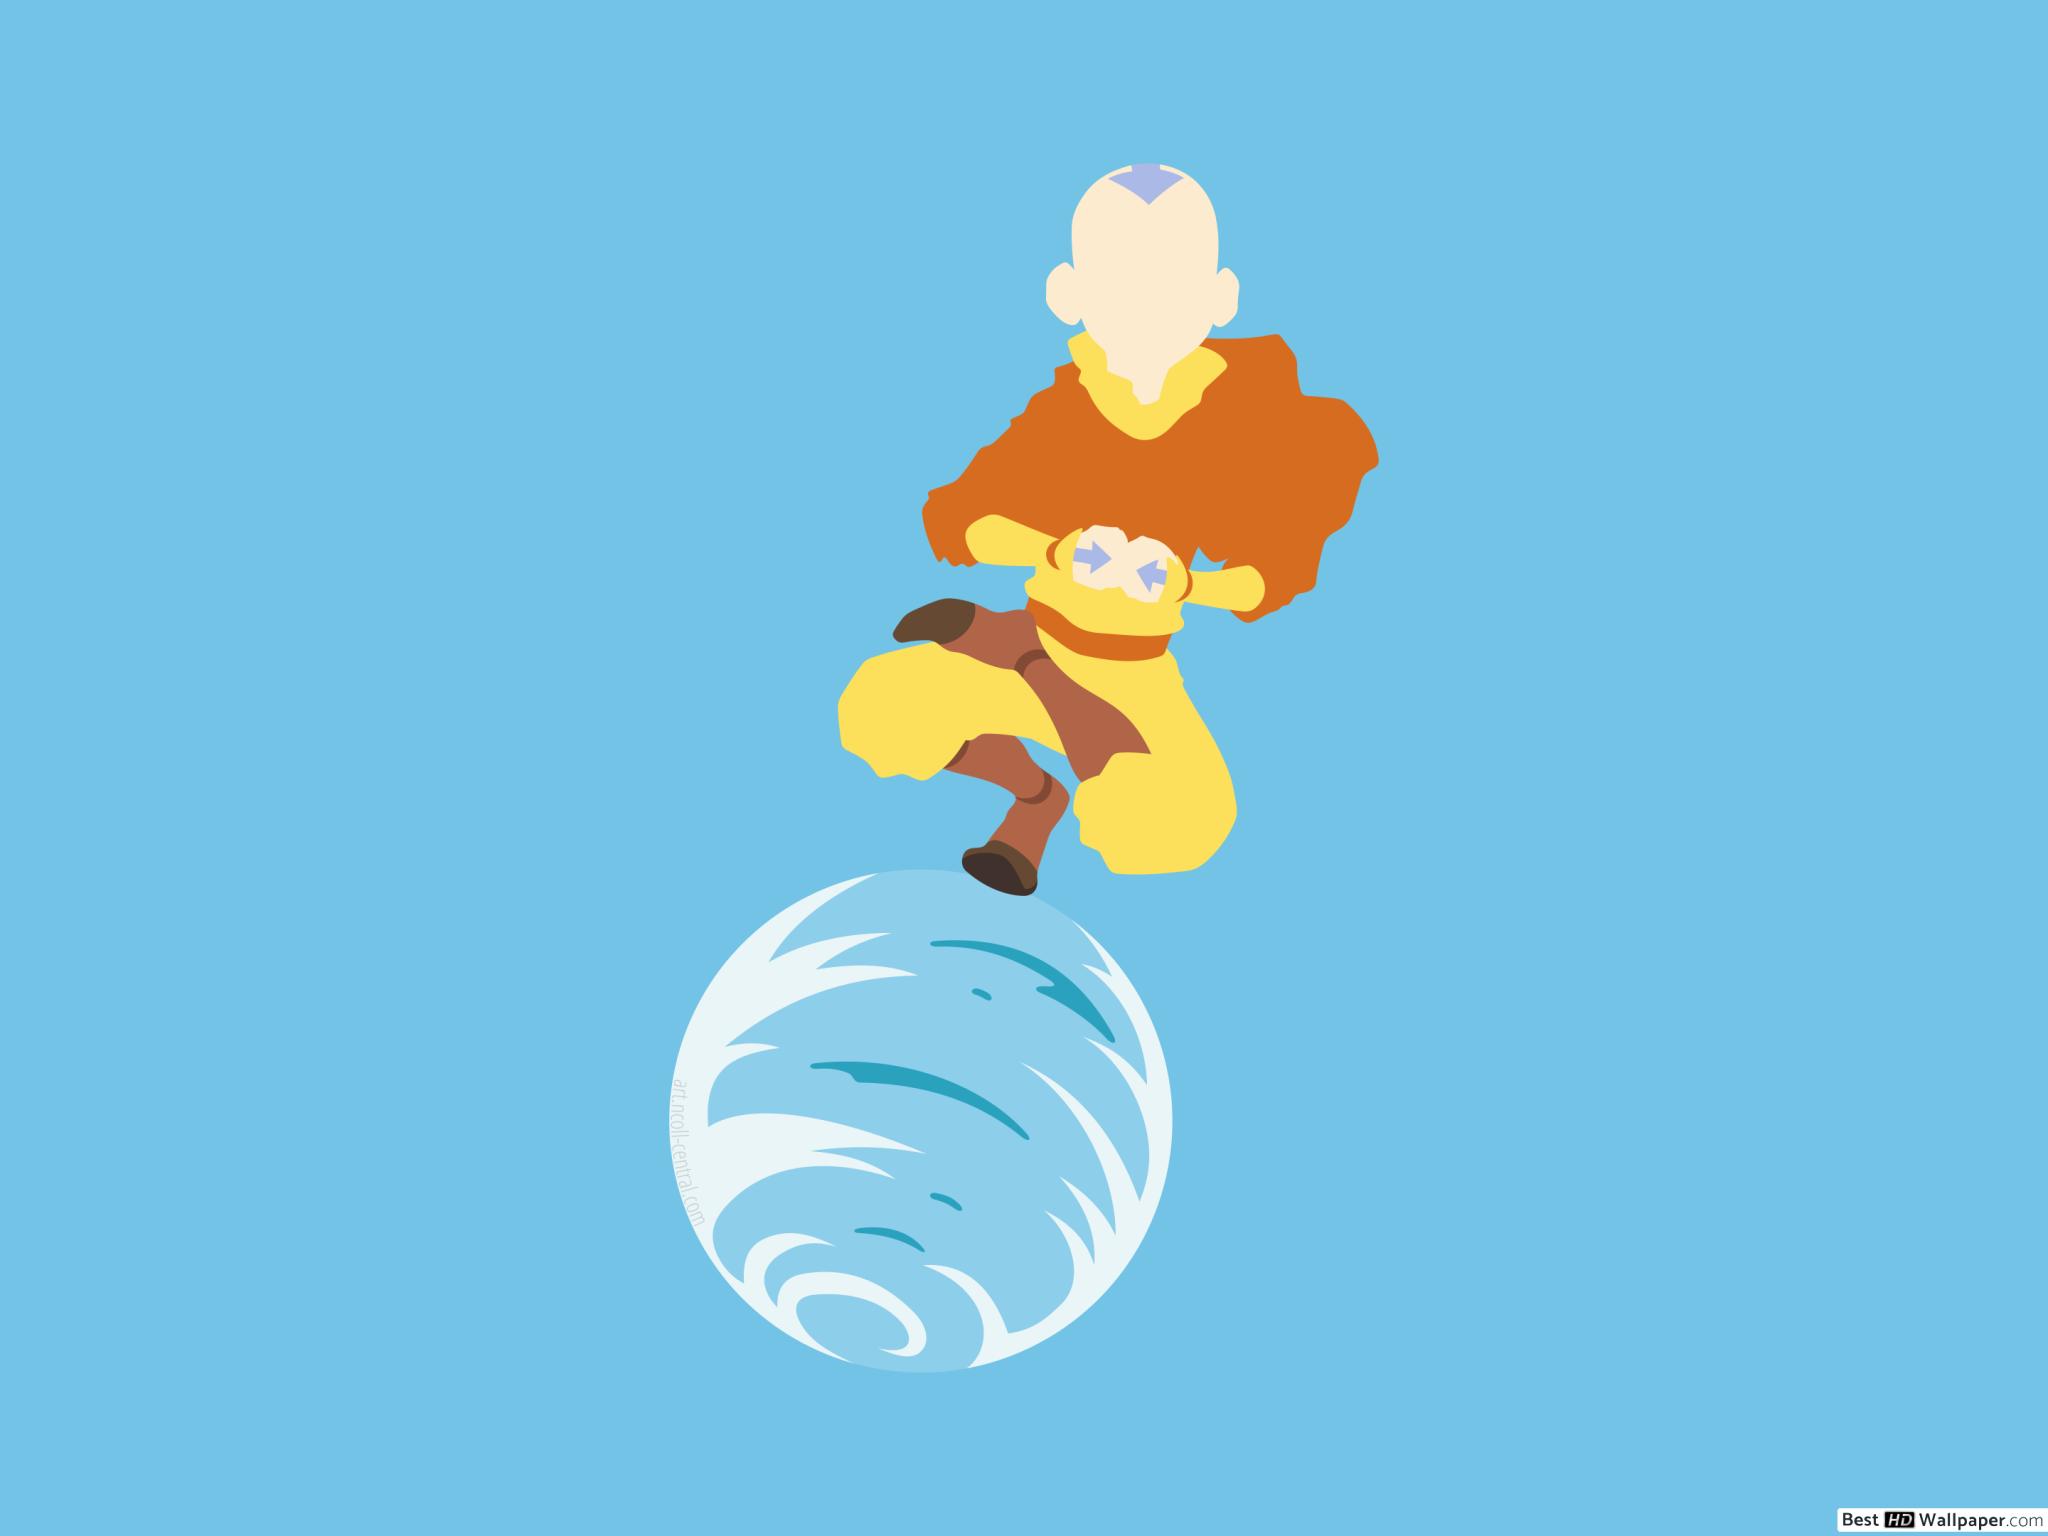 Avatar Last Airbender Backgrounds Iphone - HD Wallpaper 